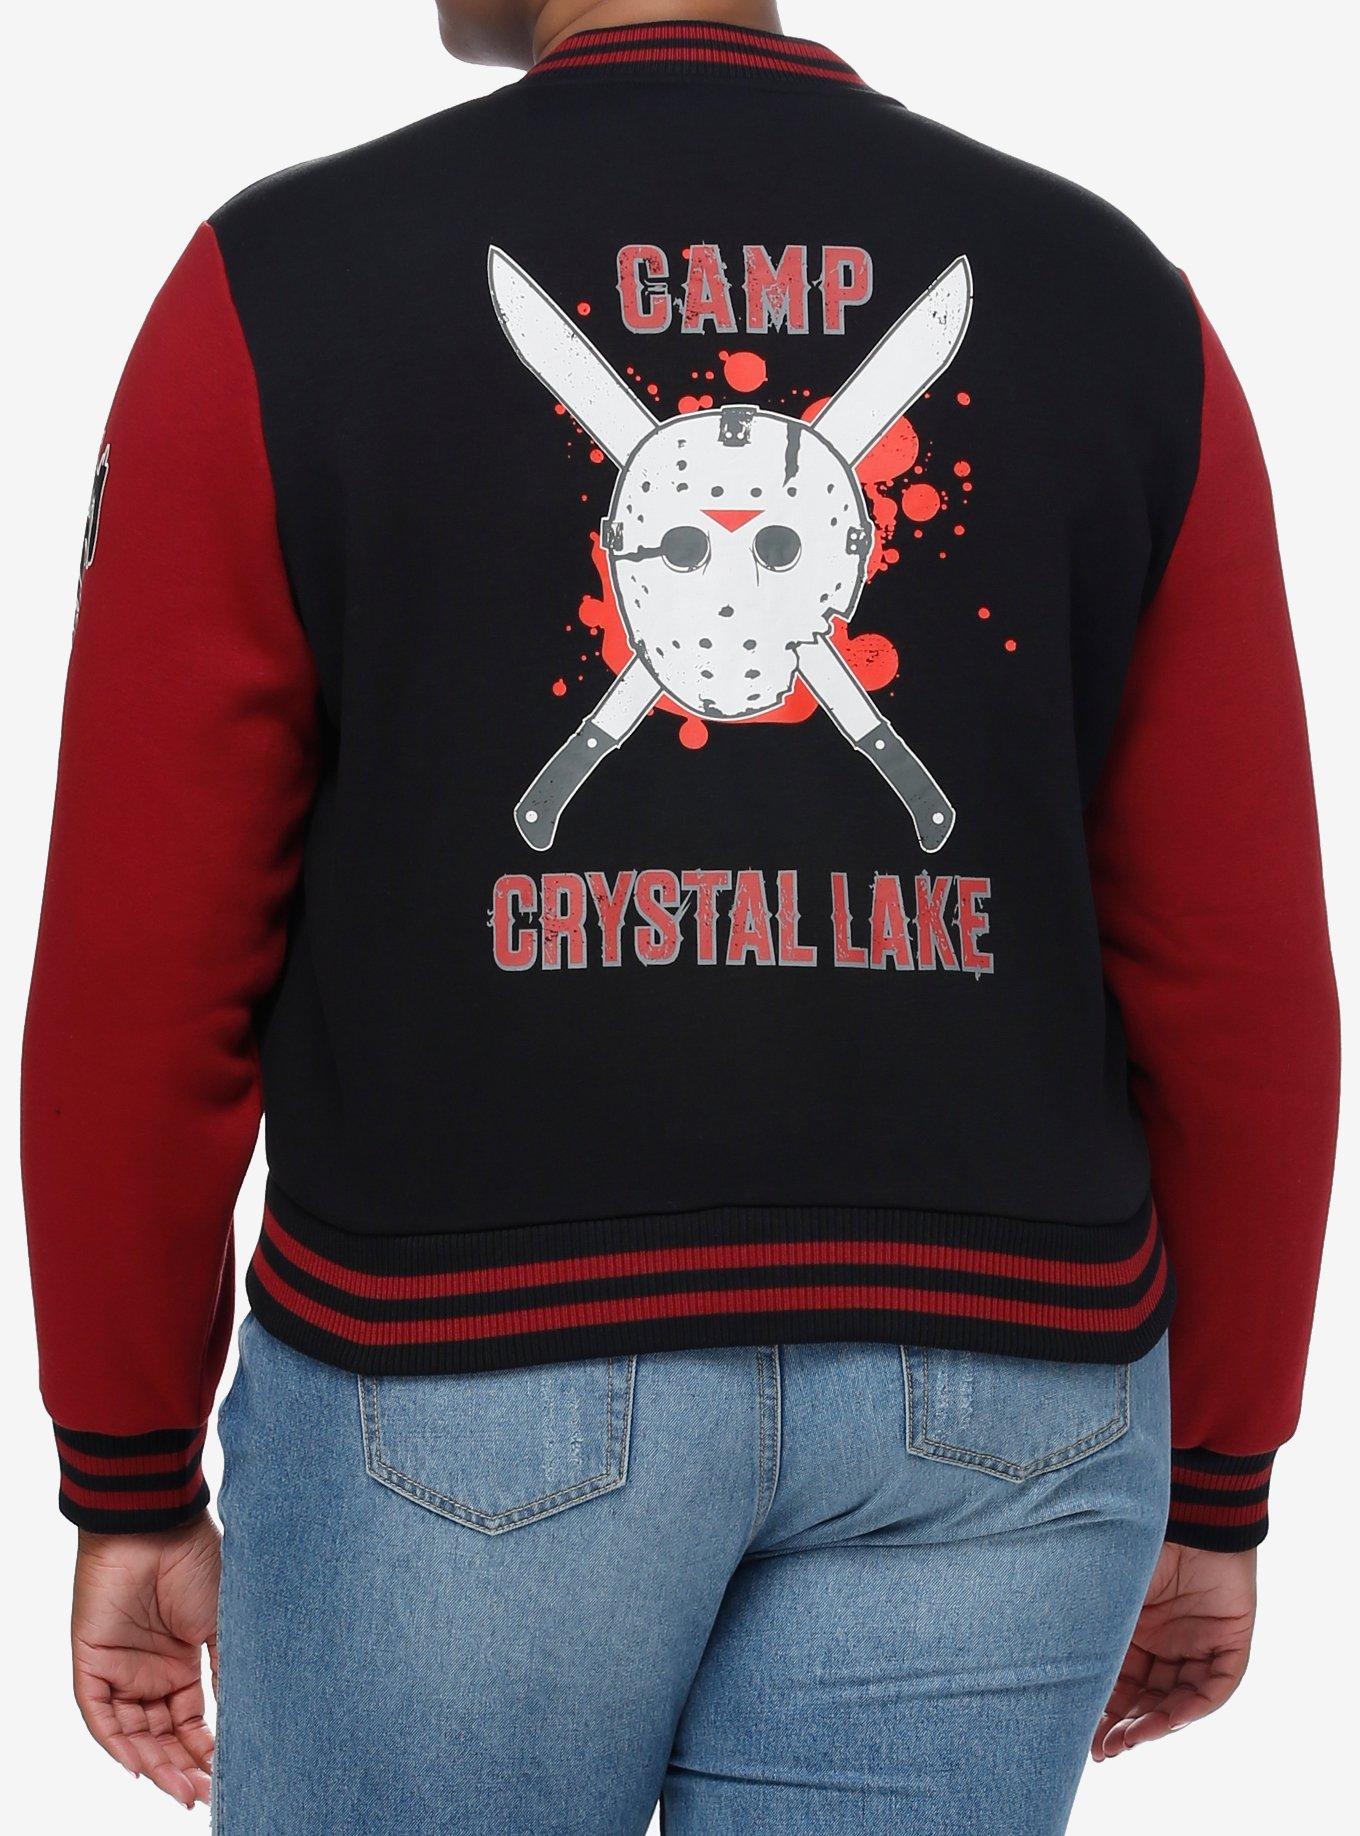 Jason Voorhees Friday The 13th Mountain Dew Baseball Jersey - Tagotee